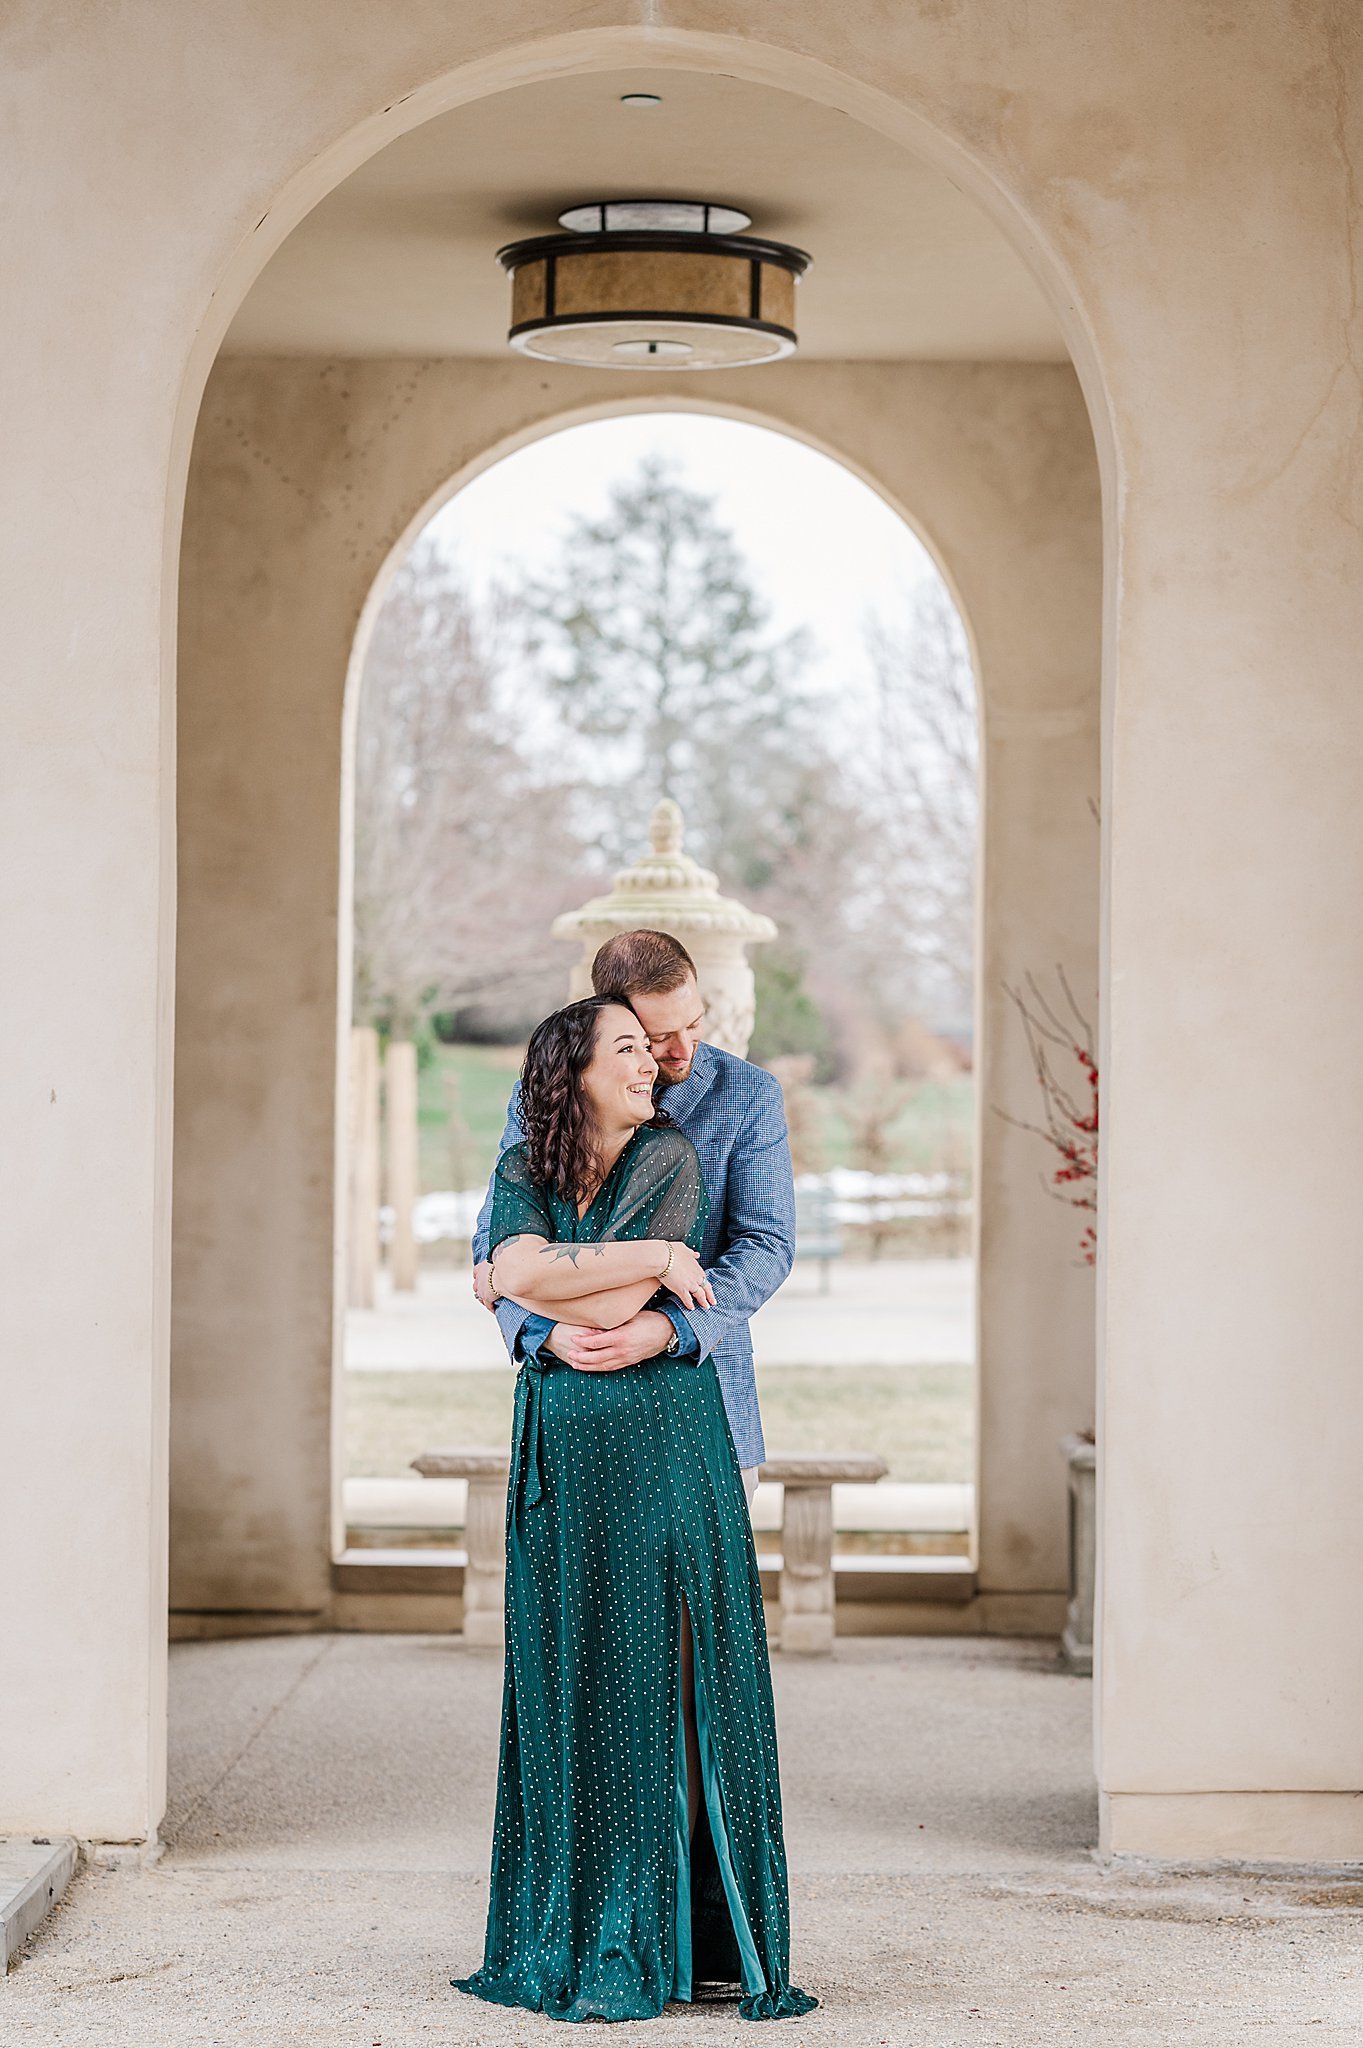 Longwood Gardens Winter Engagement Session Photography Session_4163.jpg